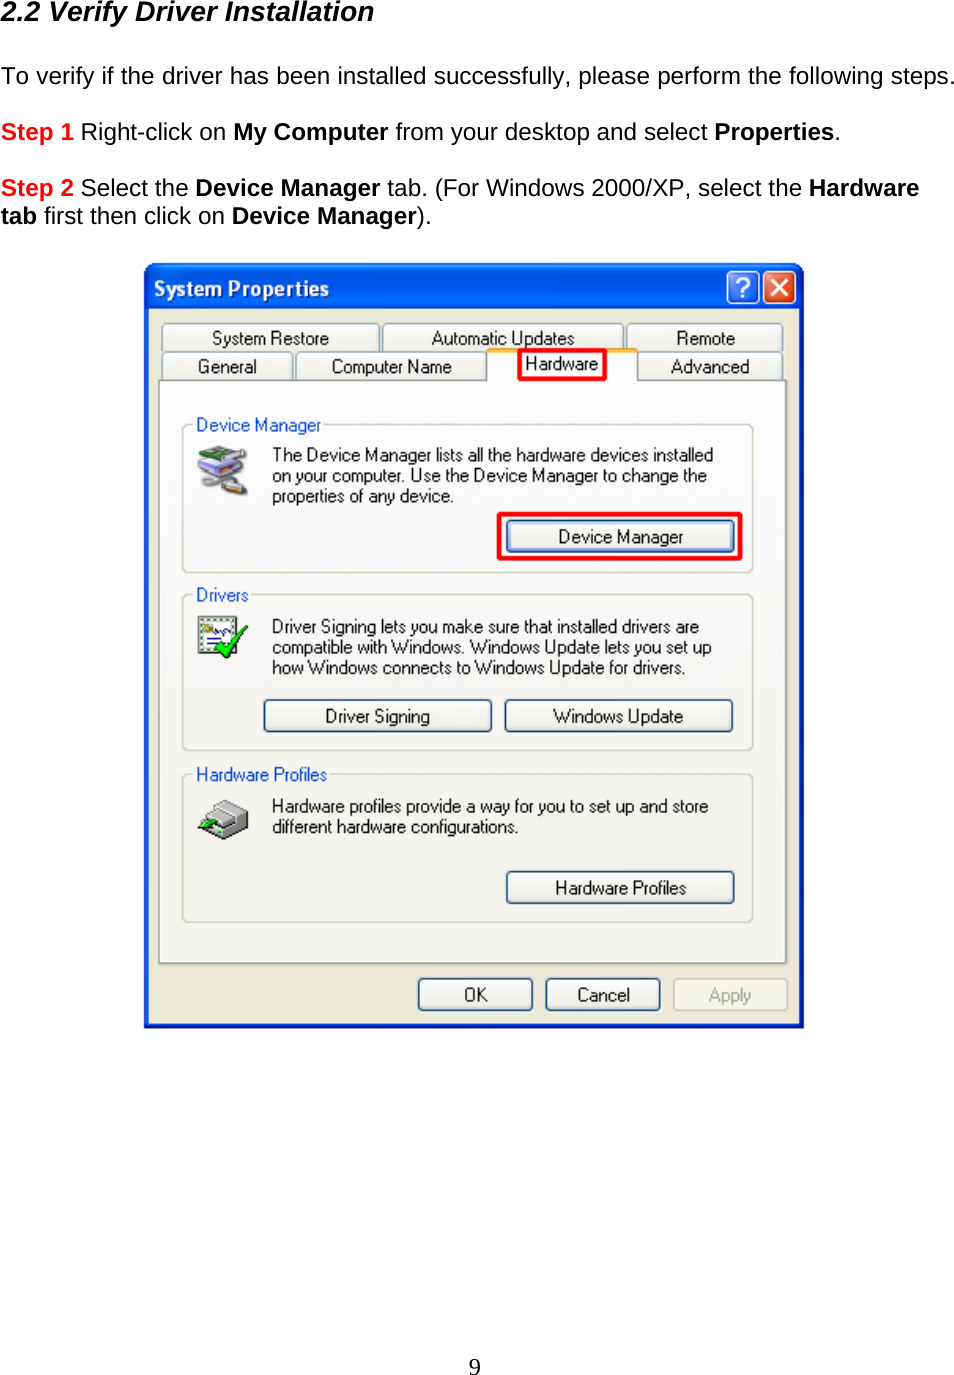 9 2.2 Verify Driver Installation  To verify if the driver has been installed successfully, please perform the following steps.  Step 1 Right-click on My Computer from your desktop and select Properties.  Step 2 Select the Device Manager tab. (For Windows 2000/XP, select the Hardware tab first then click on Device Manager).            